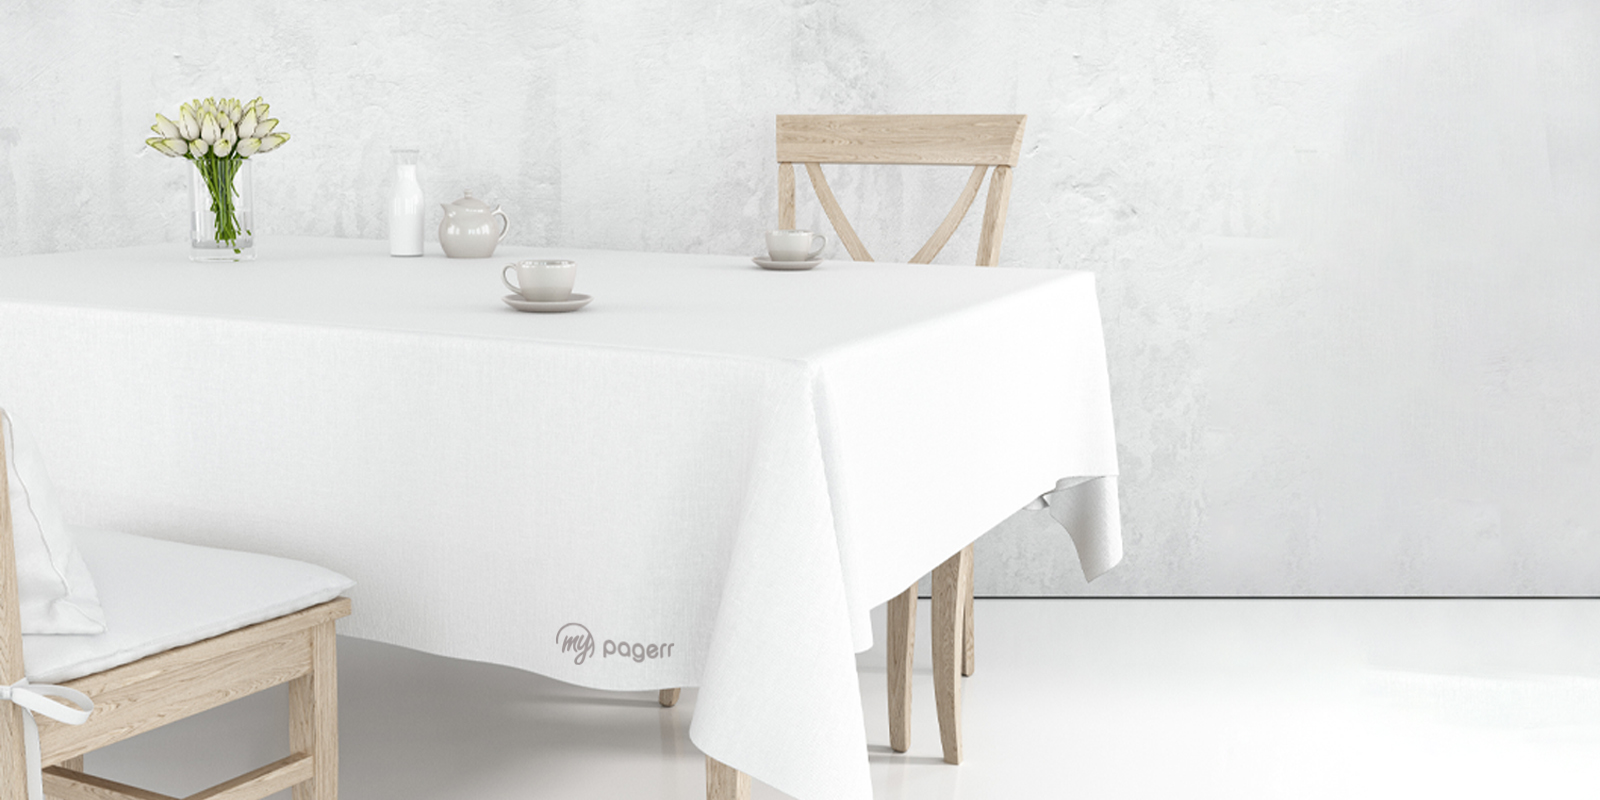 Tablecloths in Warsaw - Print with Pagerr